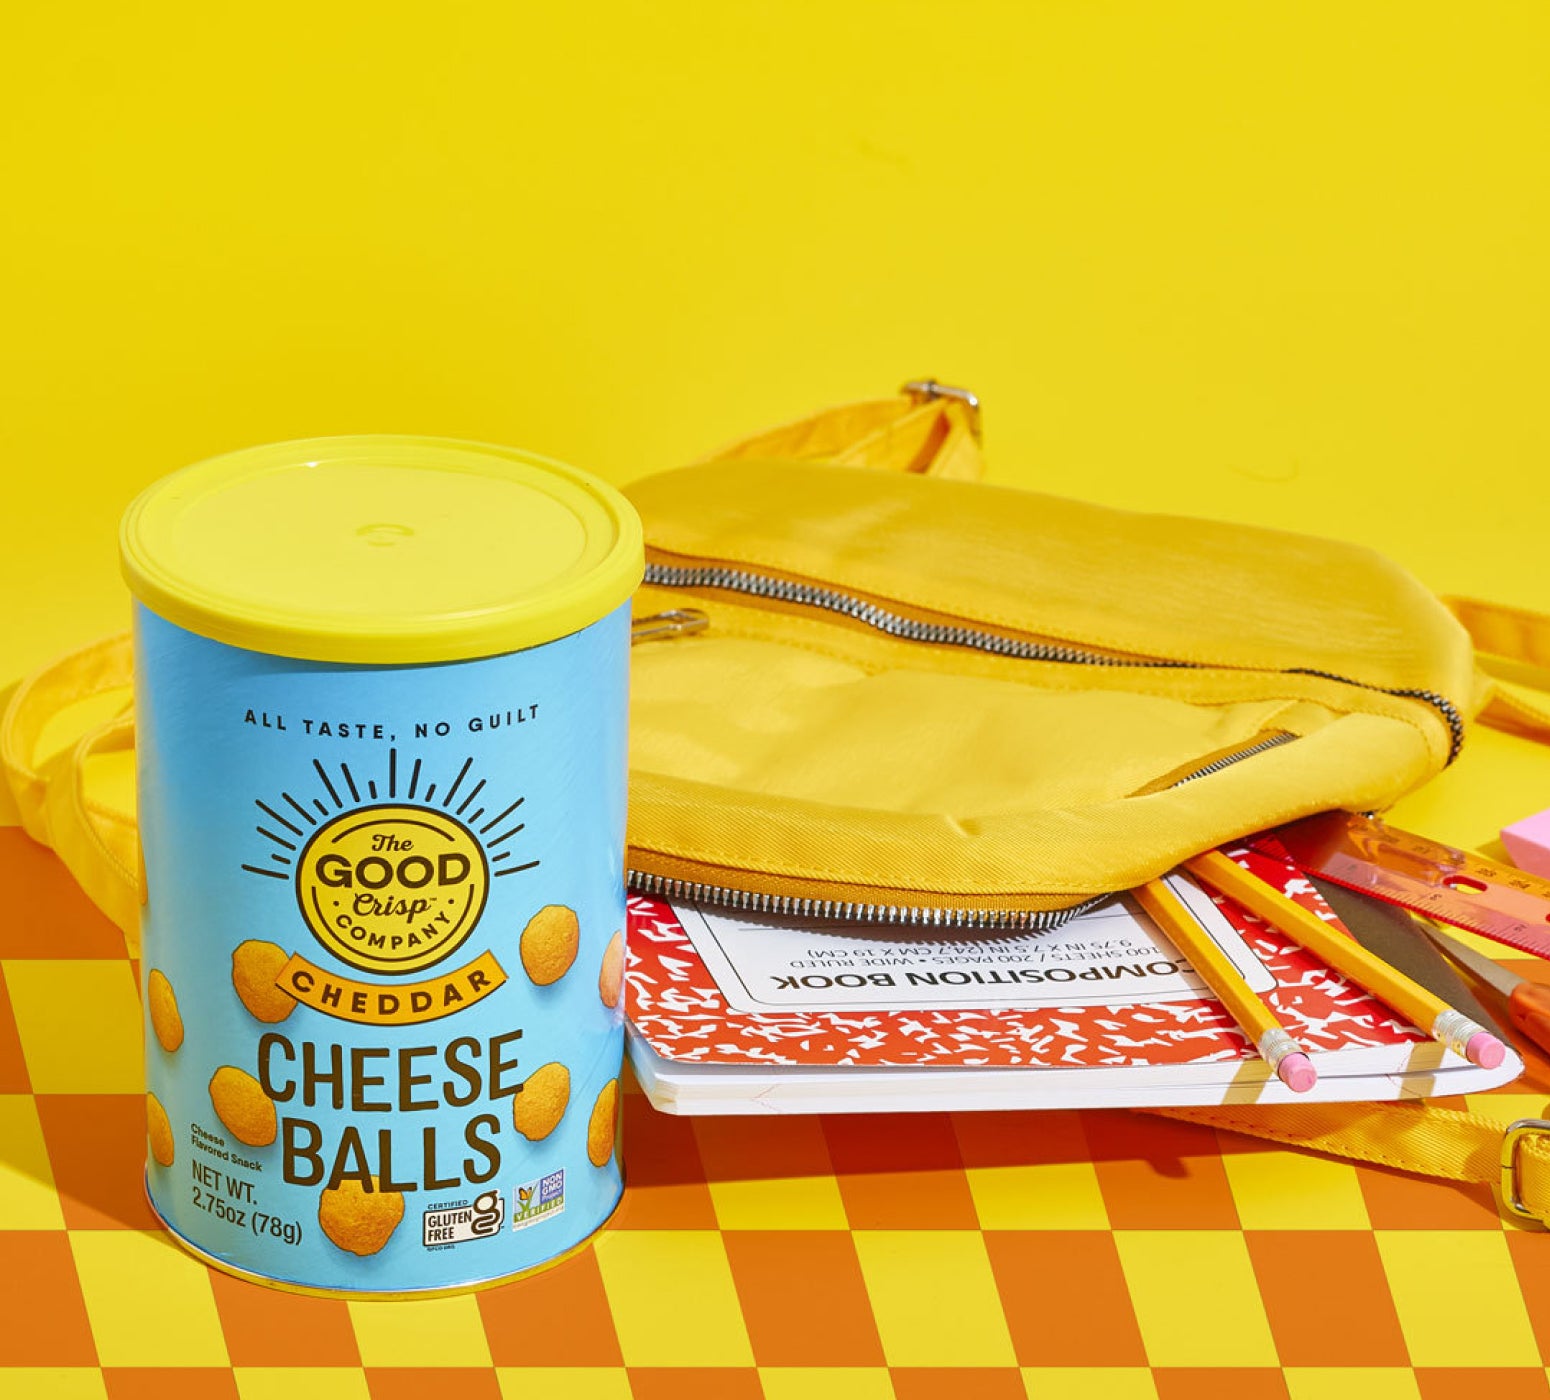 Cheese Balls cannister next to pile of stationary